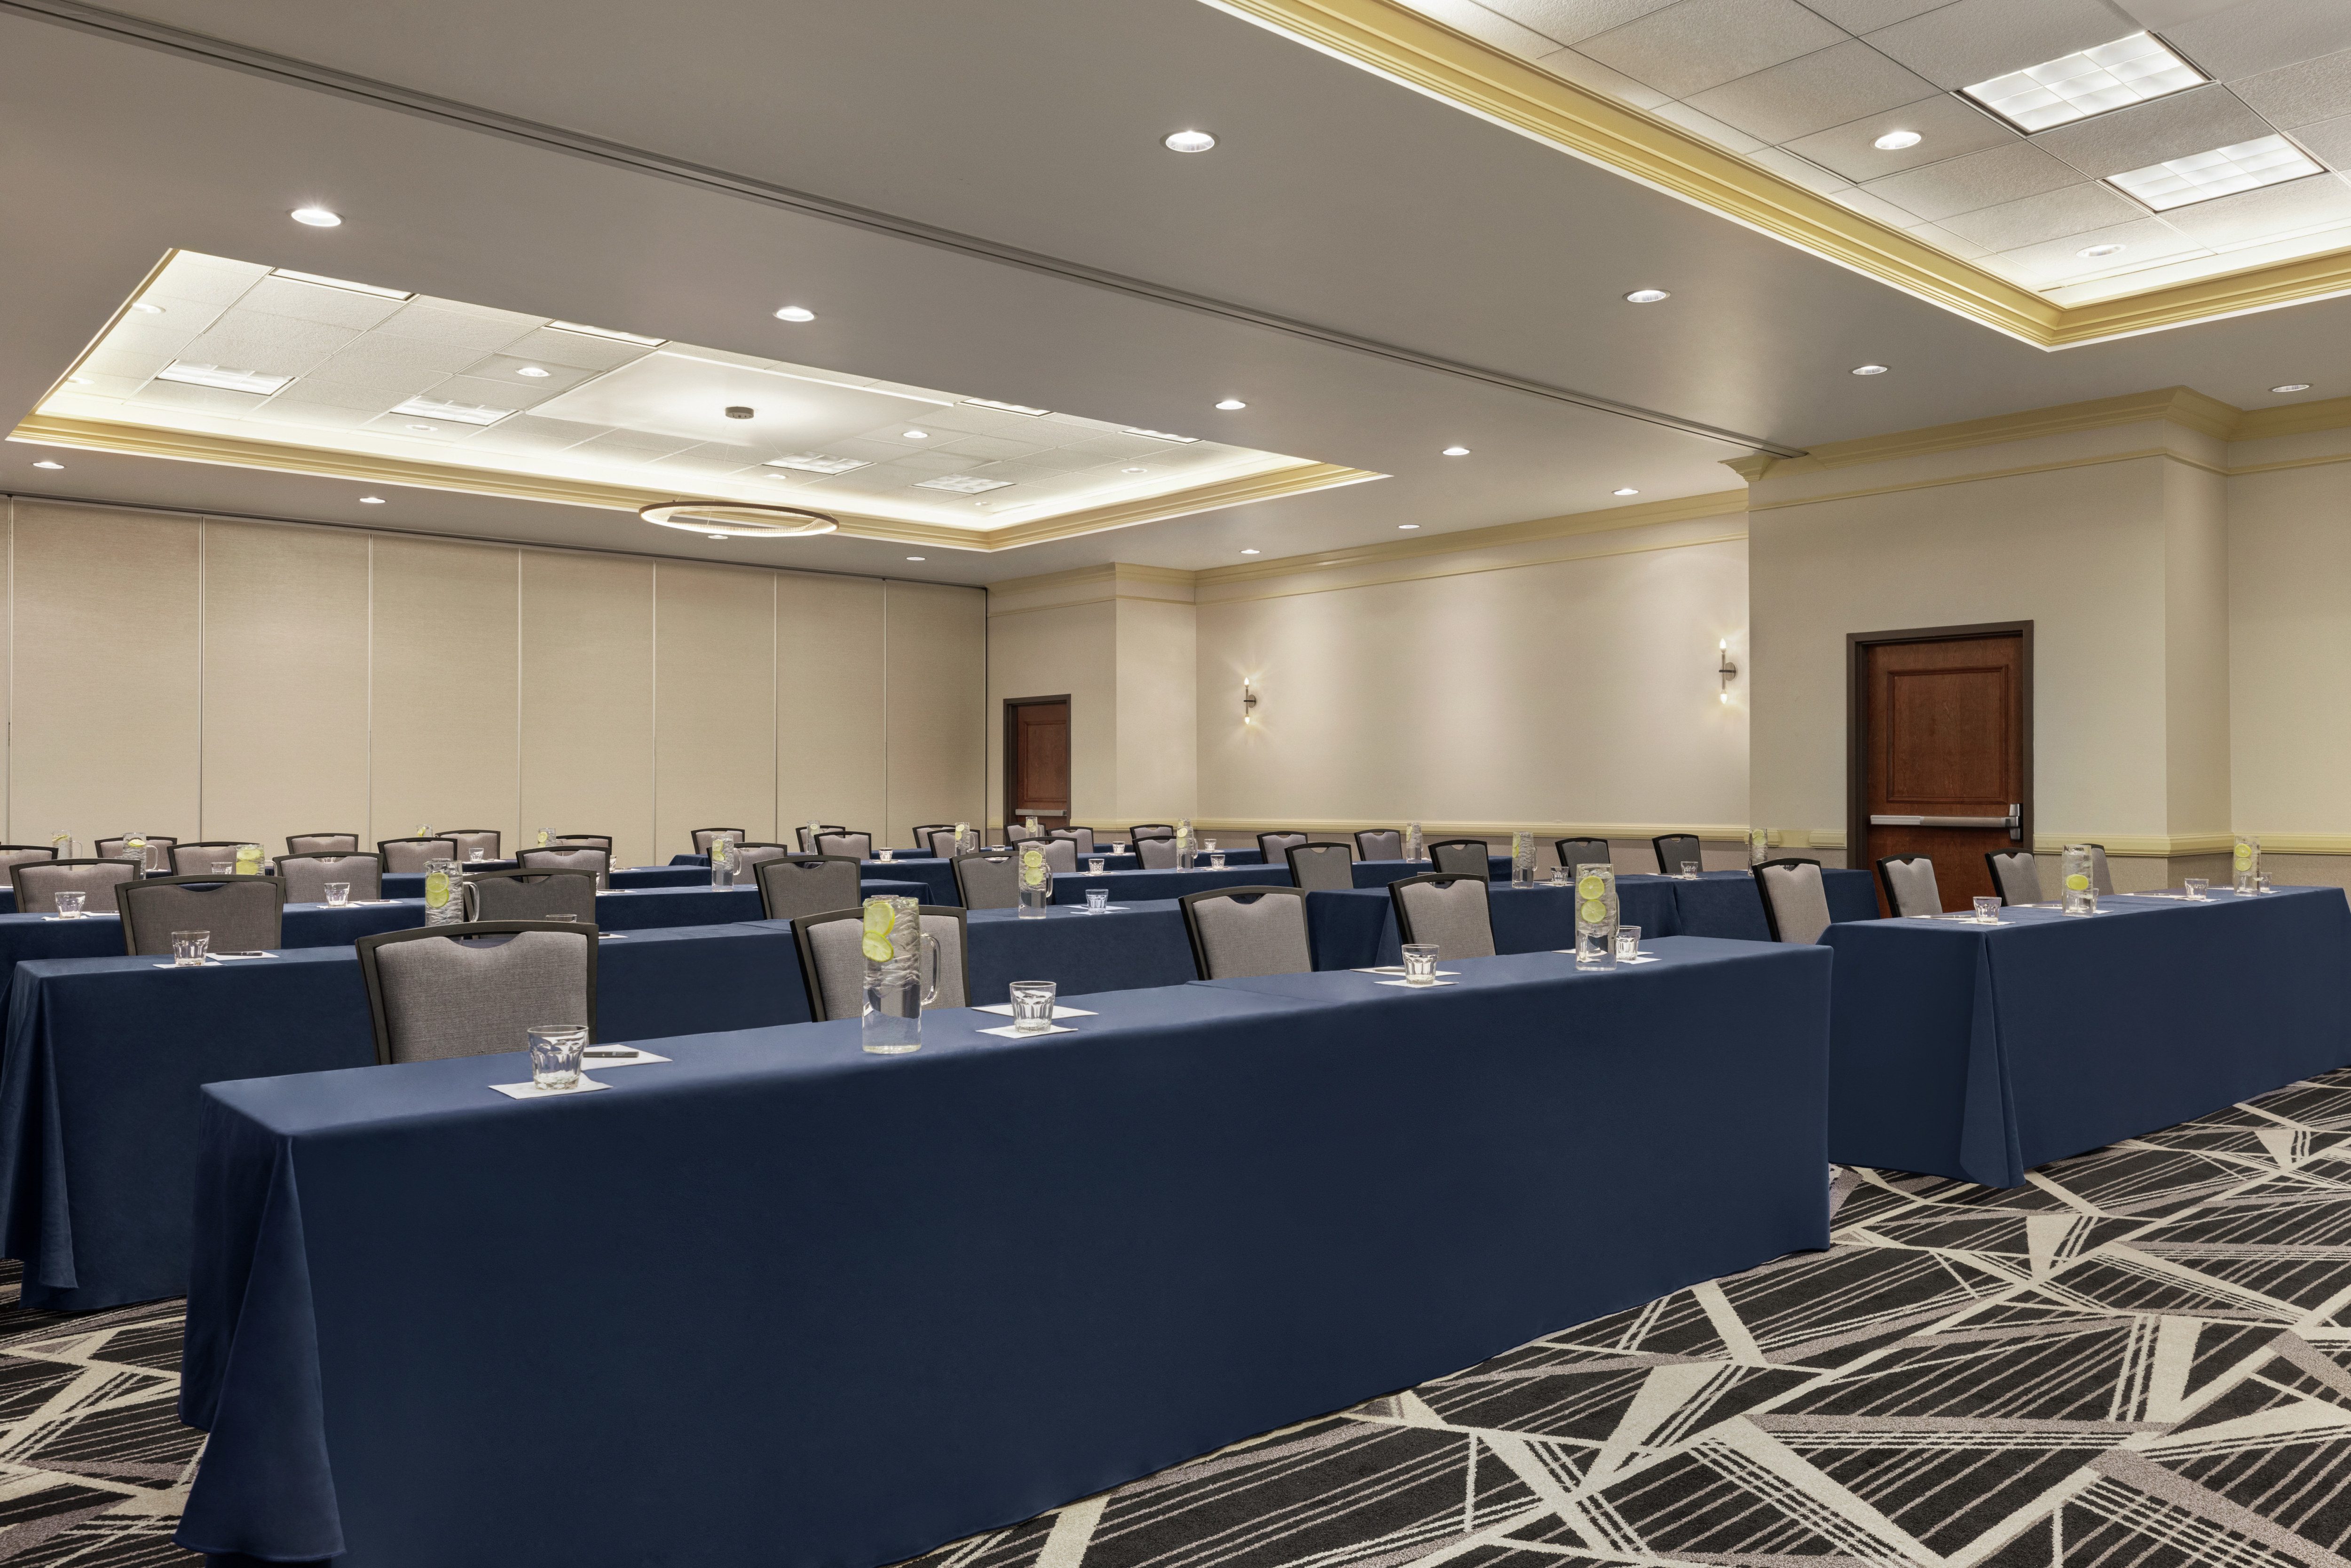 Spacious ballroom on-site featuring classroom style setup for corporate events and functions.